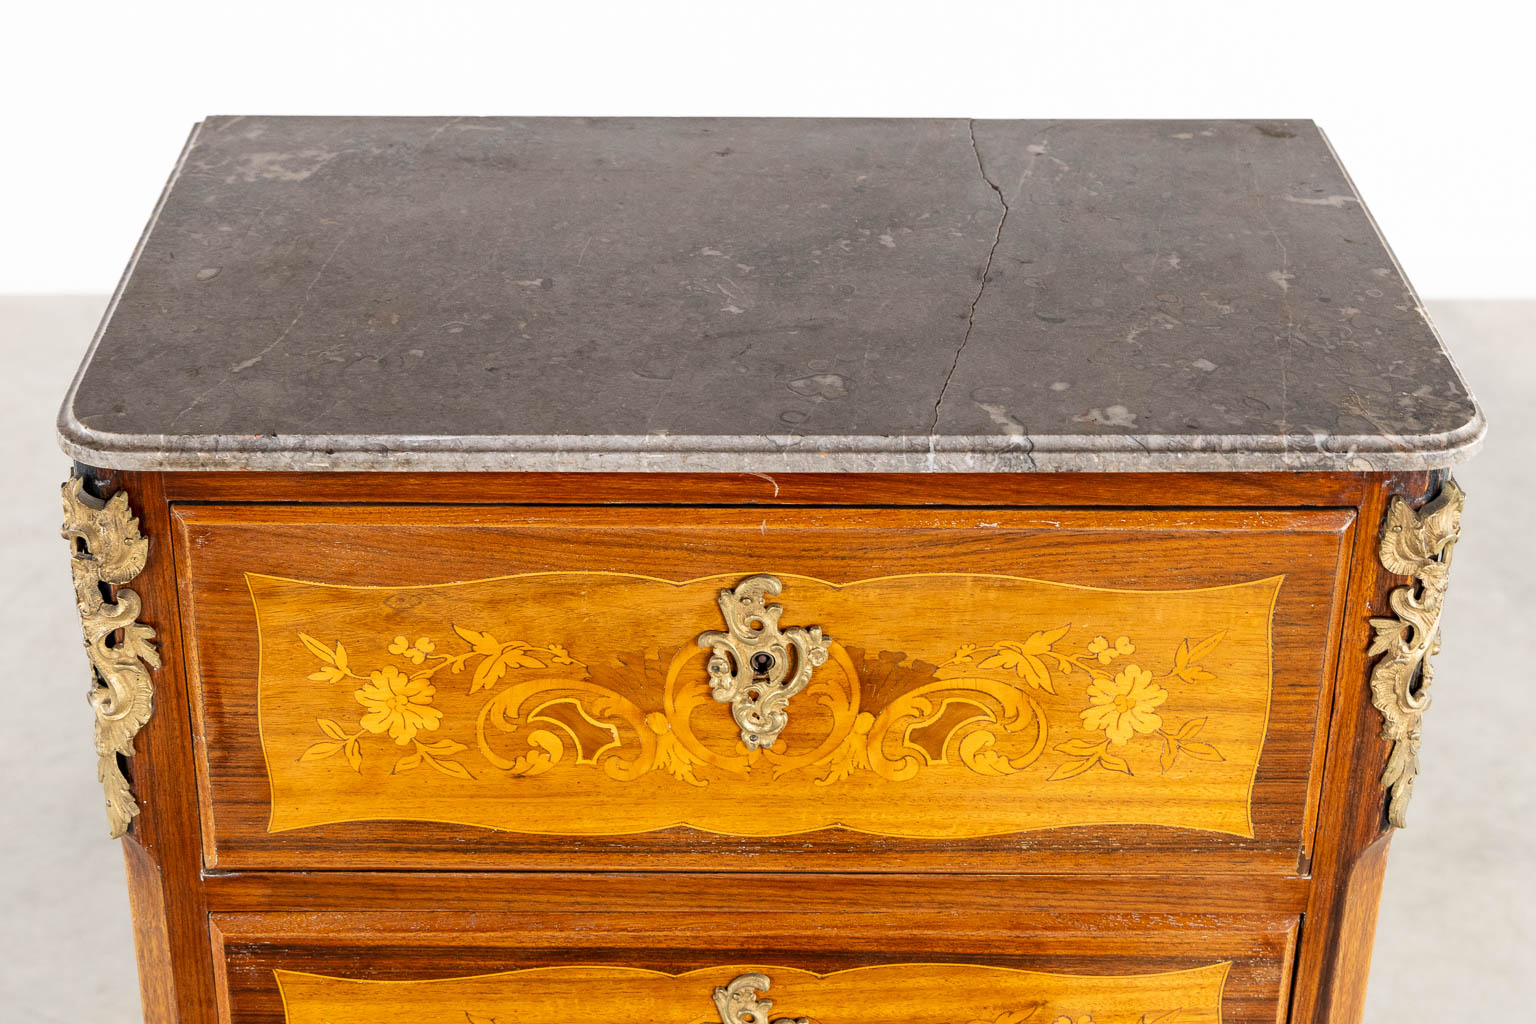 A Secretaire cabinet, Marquetry inlay and mounted with bronze. Circa 1900. (L:34 x W:56 x H:128 cm) - Image 11 of 15